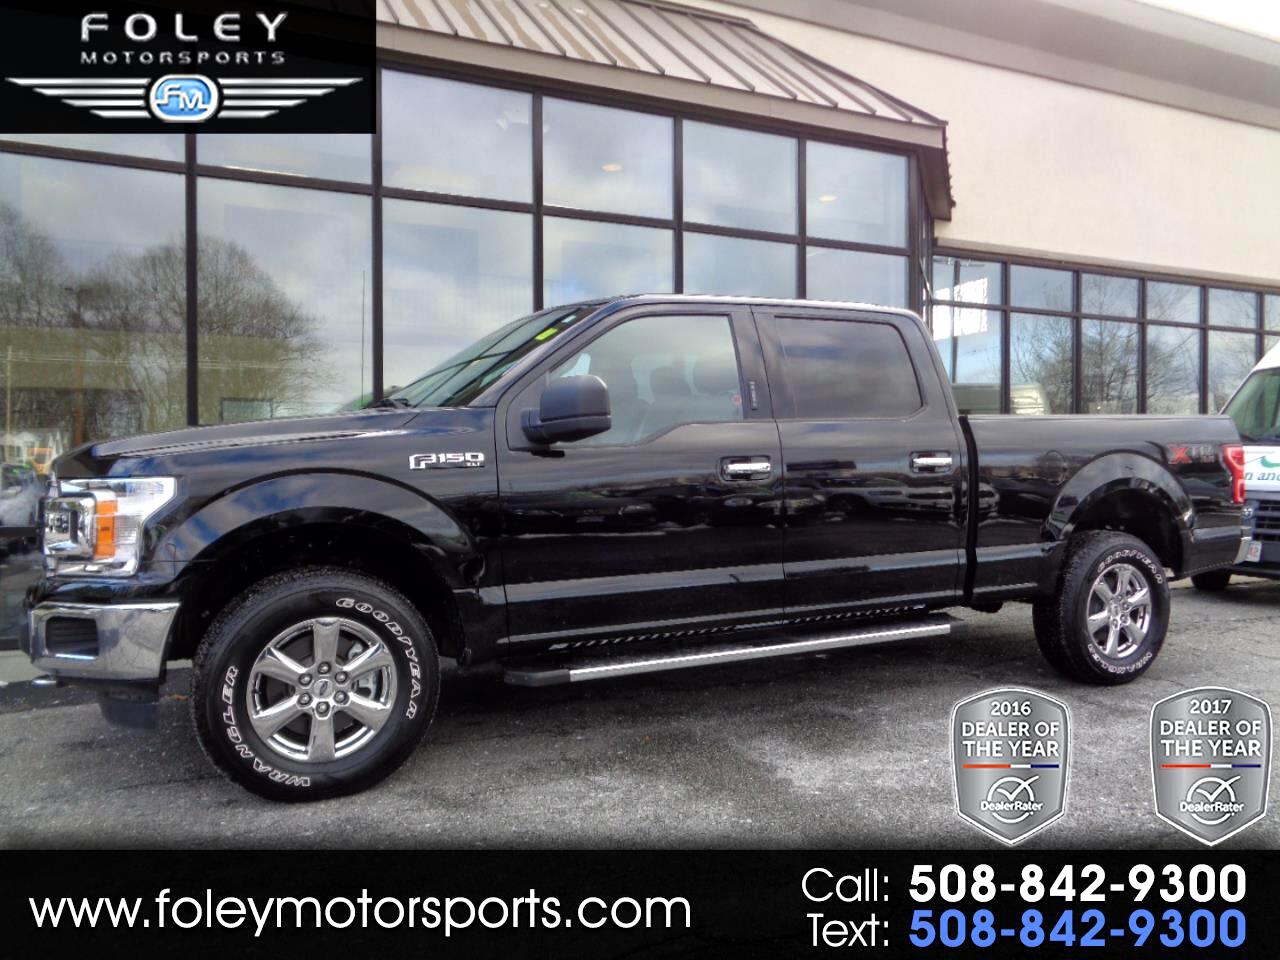 Used 2018 Ford F-150 XLT SuperCrew 6.5-ft. Bed 4WD for Sale in 2018 Ford F 150 Xlt Supercrew 6.5 Ft Bed 4wd